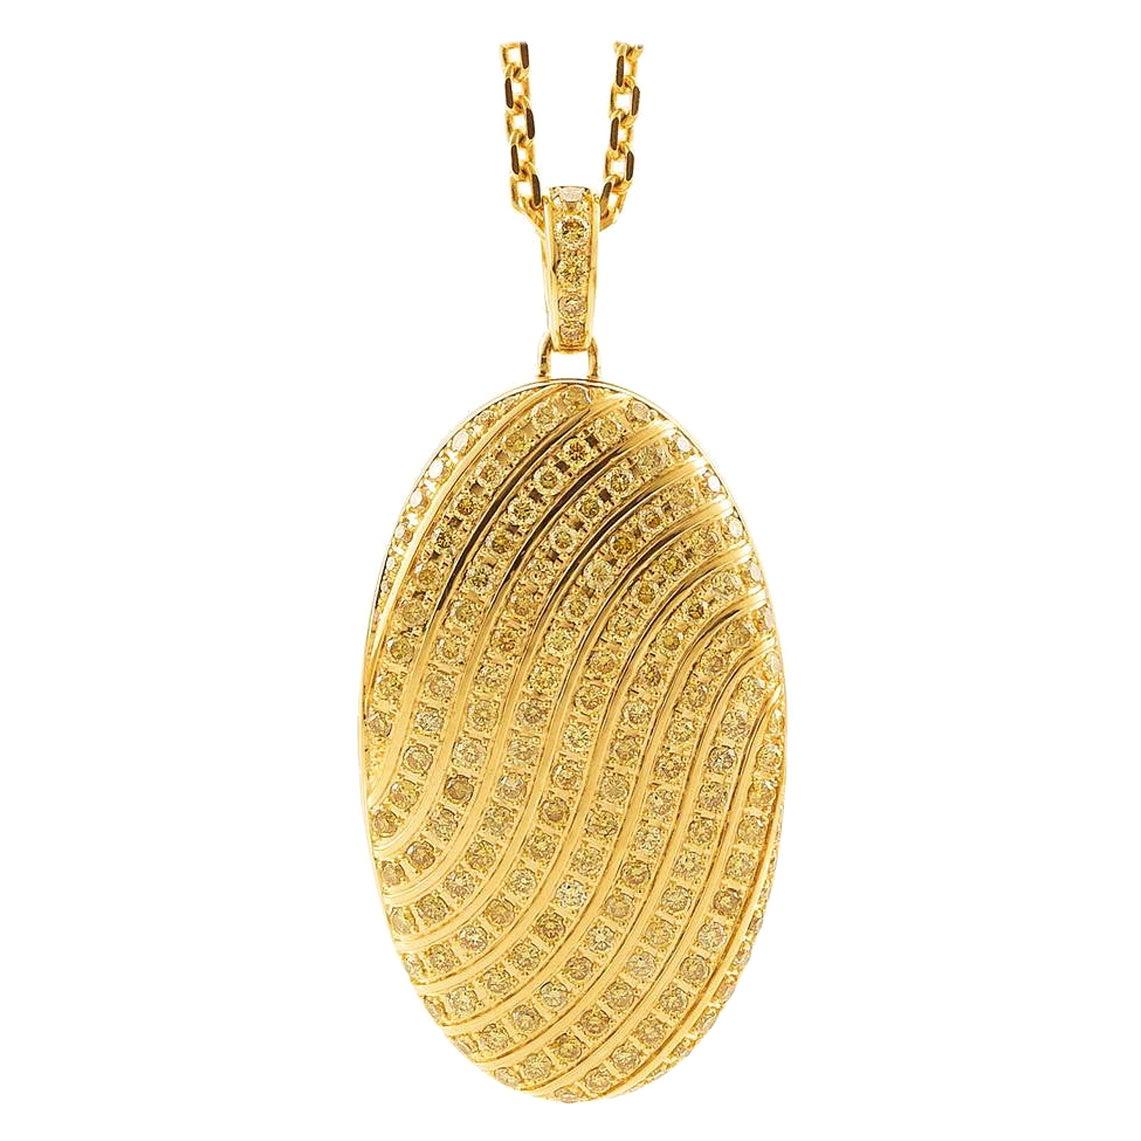 Victor Mayer Calima Locket Necklace in 18k Yellow Gold 155 Fancy Yellow Diamonds